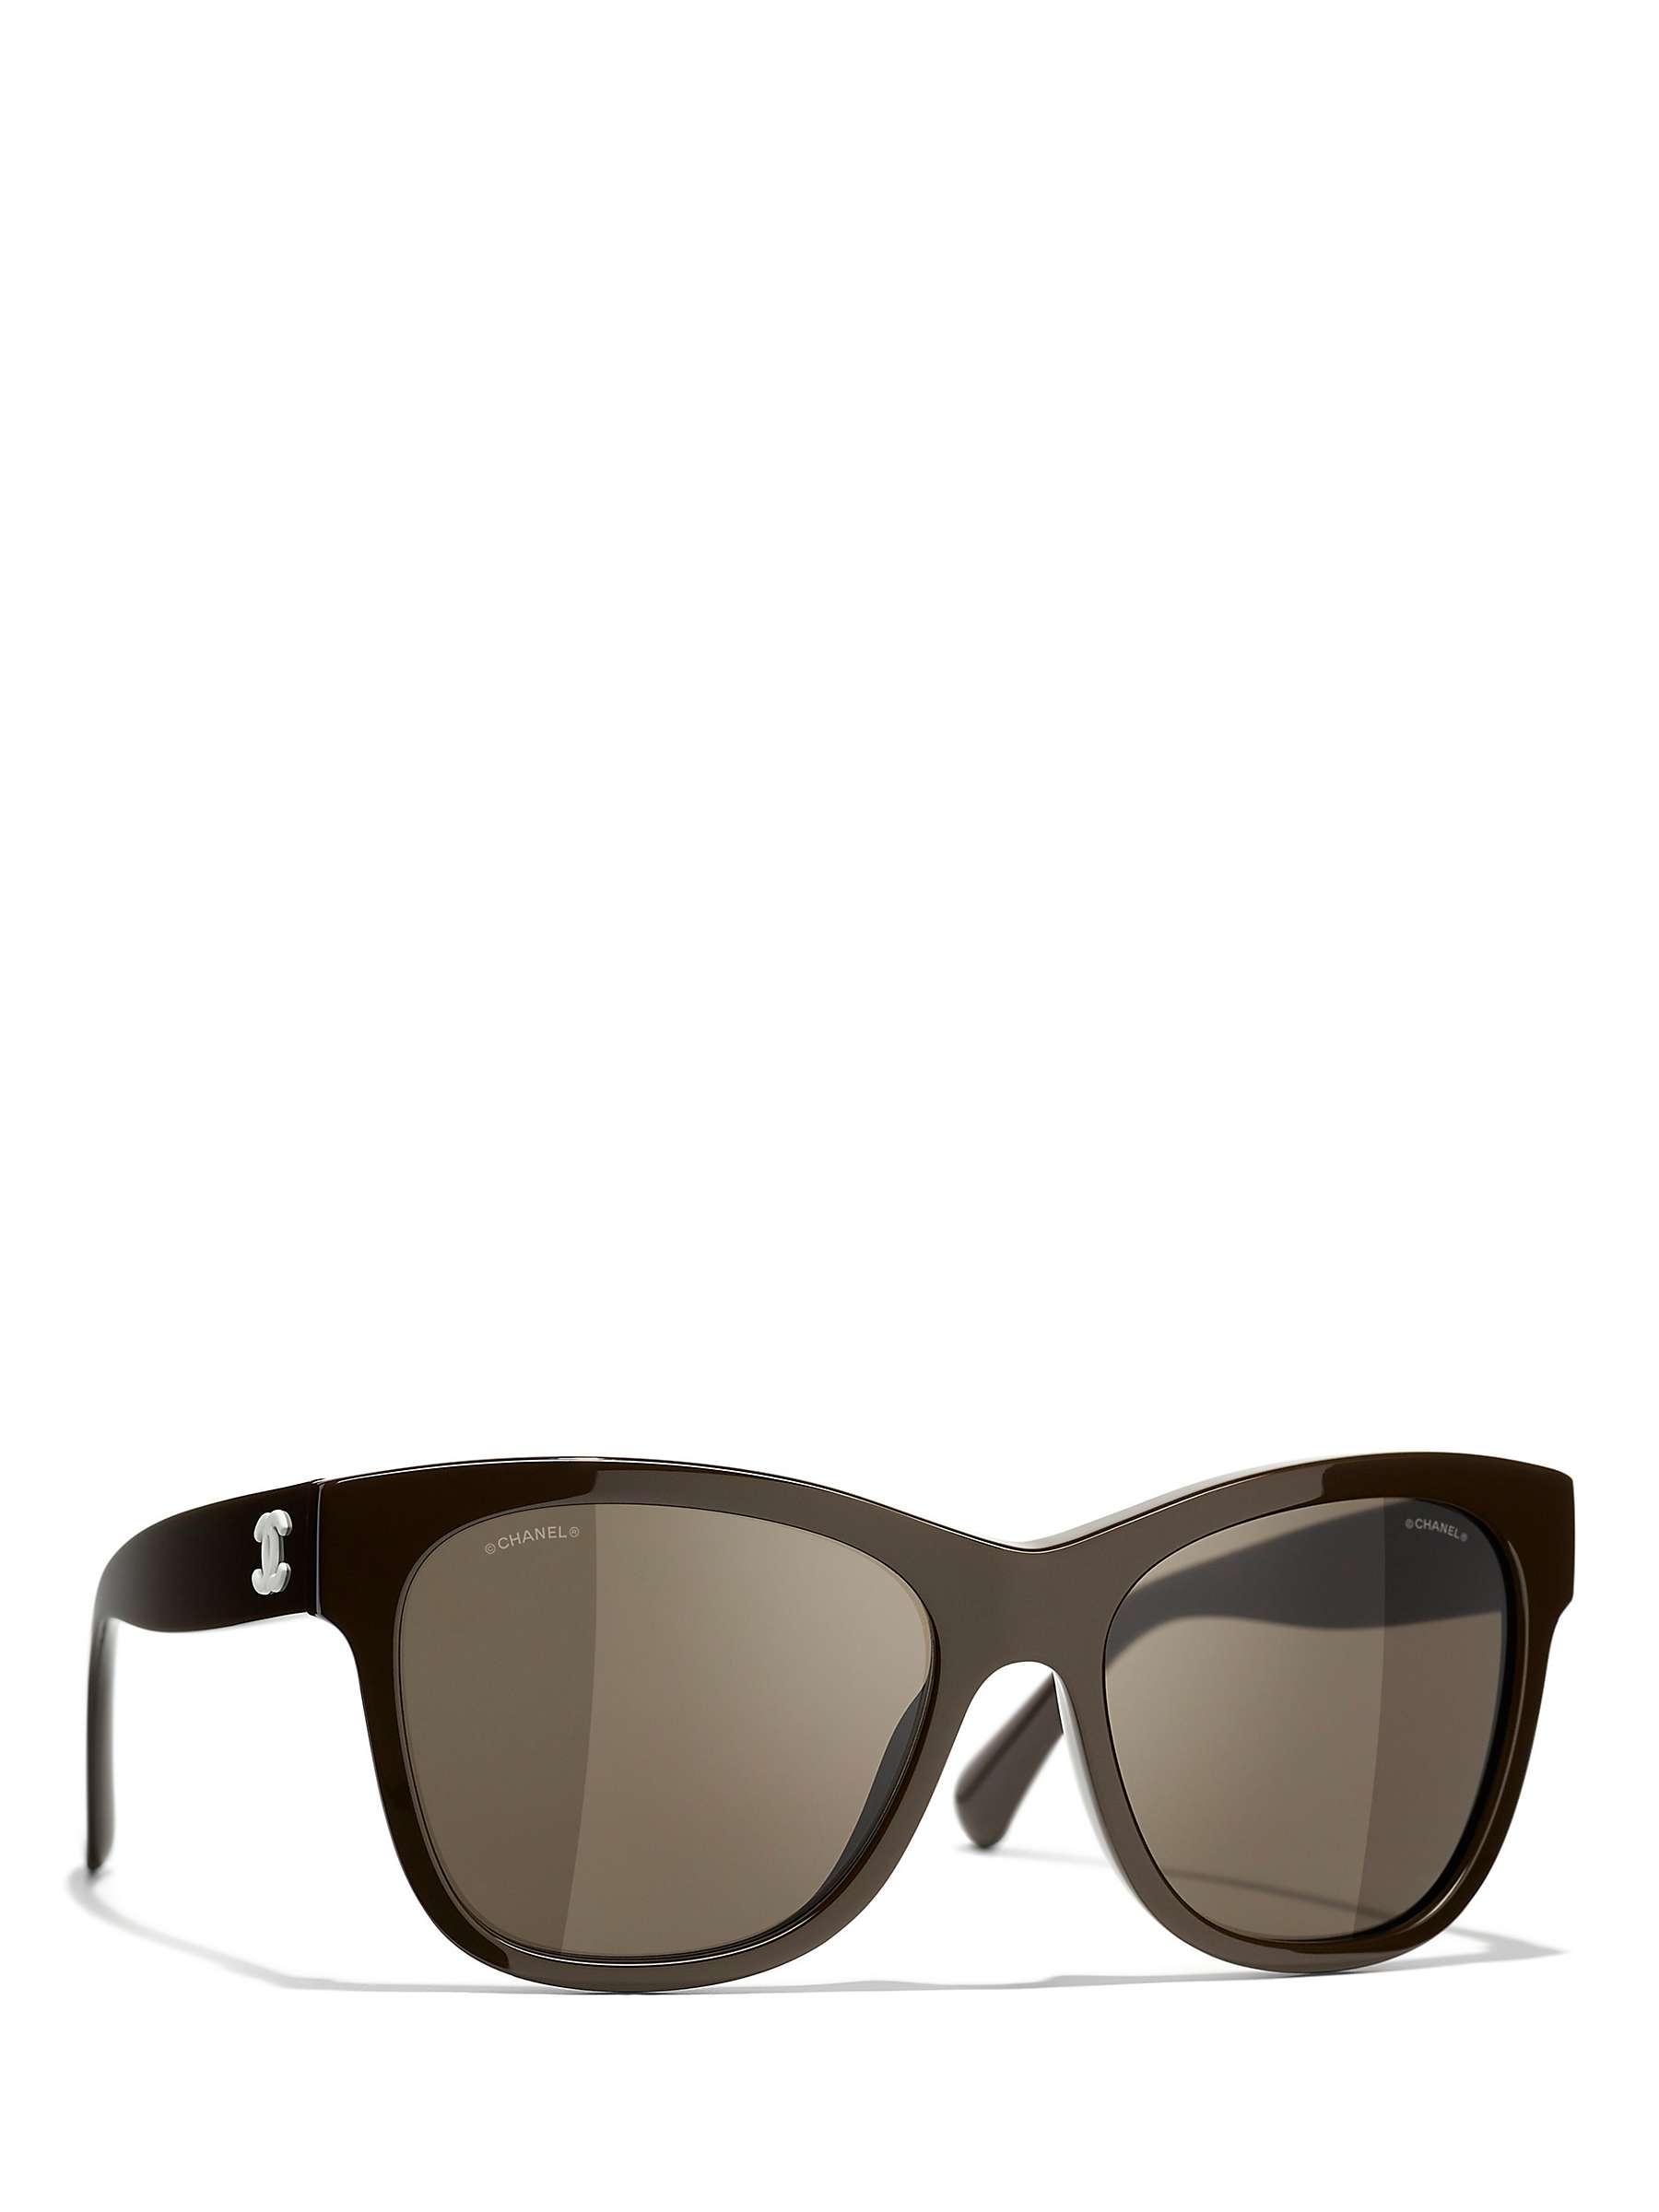 Buy CHANEL Square Sunglasses CH5380 Brown Online at johnlewis.com